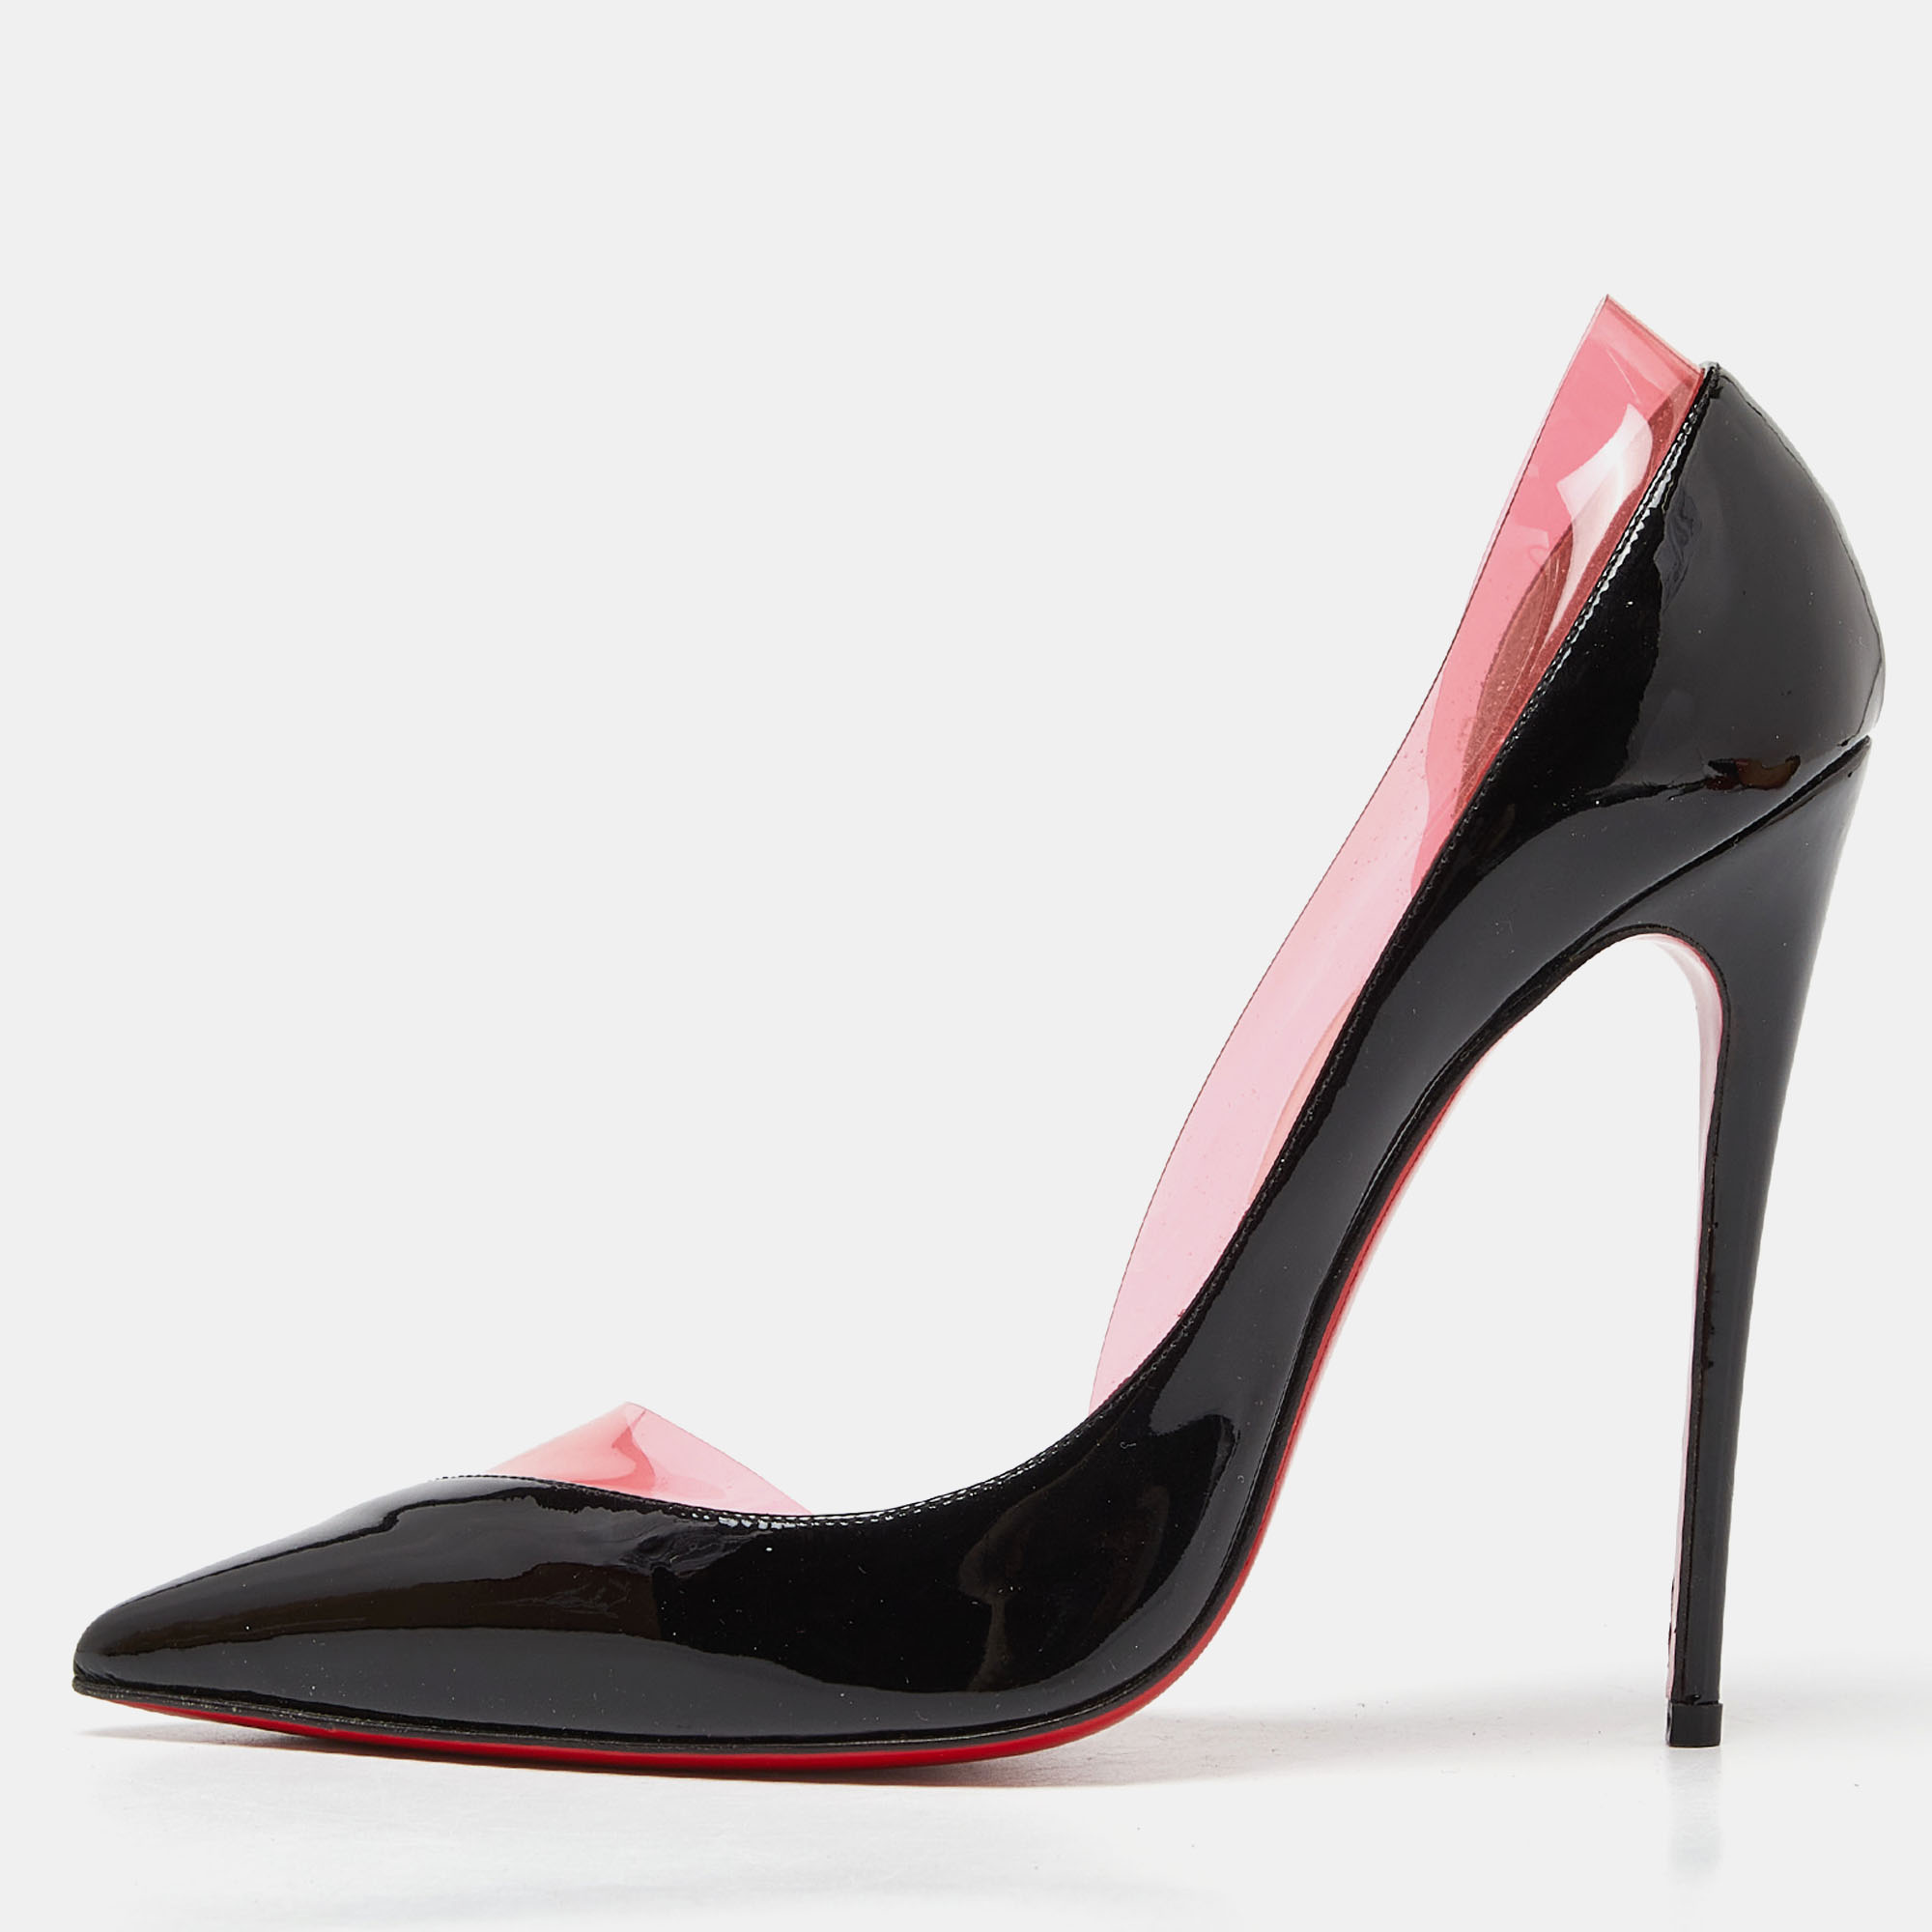 Christian louboutin black/pink patent leather and pvc miss rigidaine pumps size 38